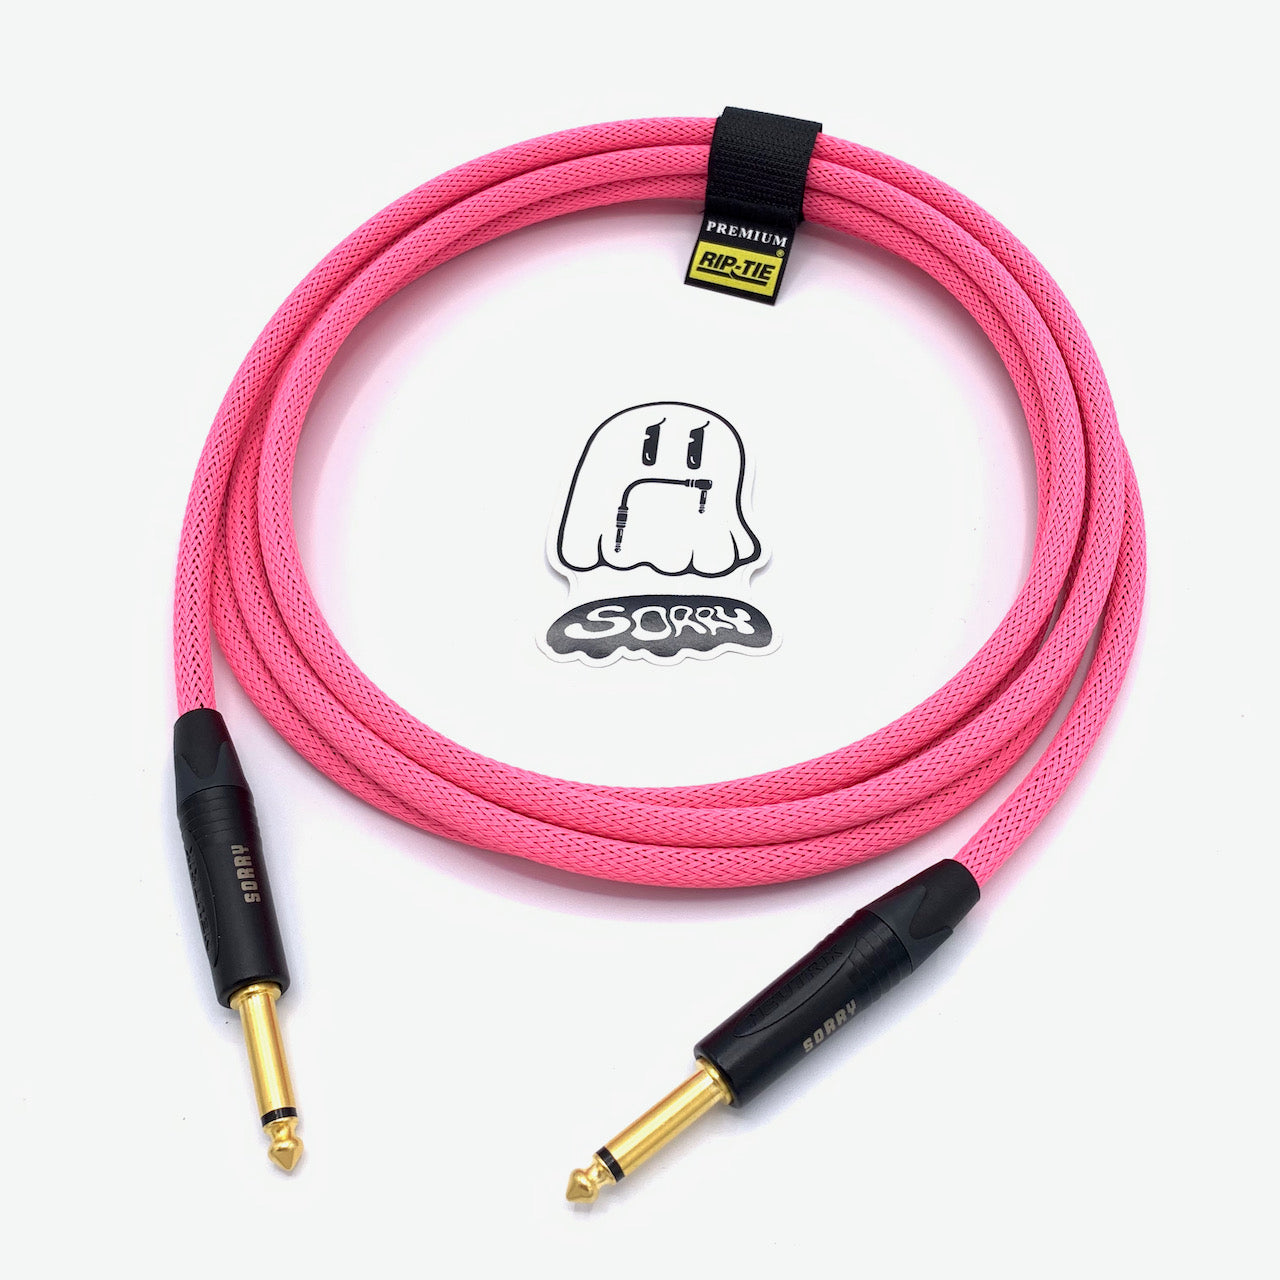 SORRY Straight to Straight Guitar / Instrument Cable - Neon Pink